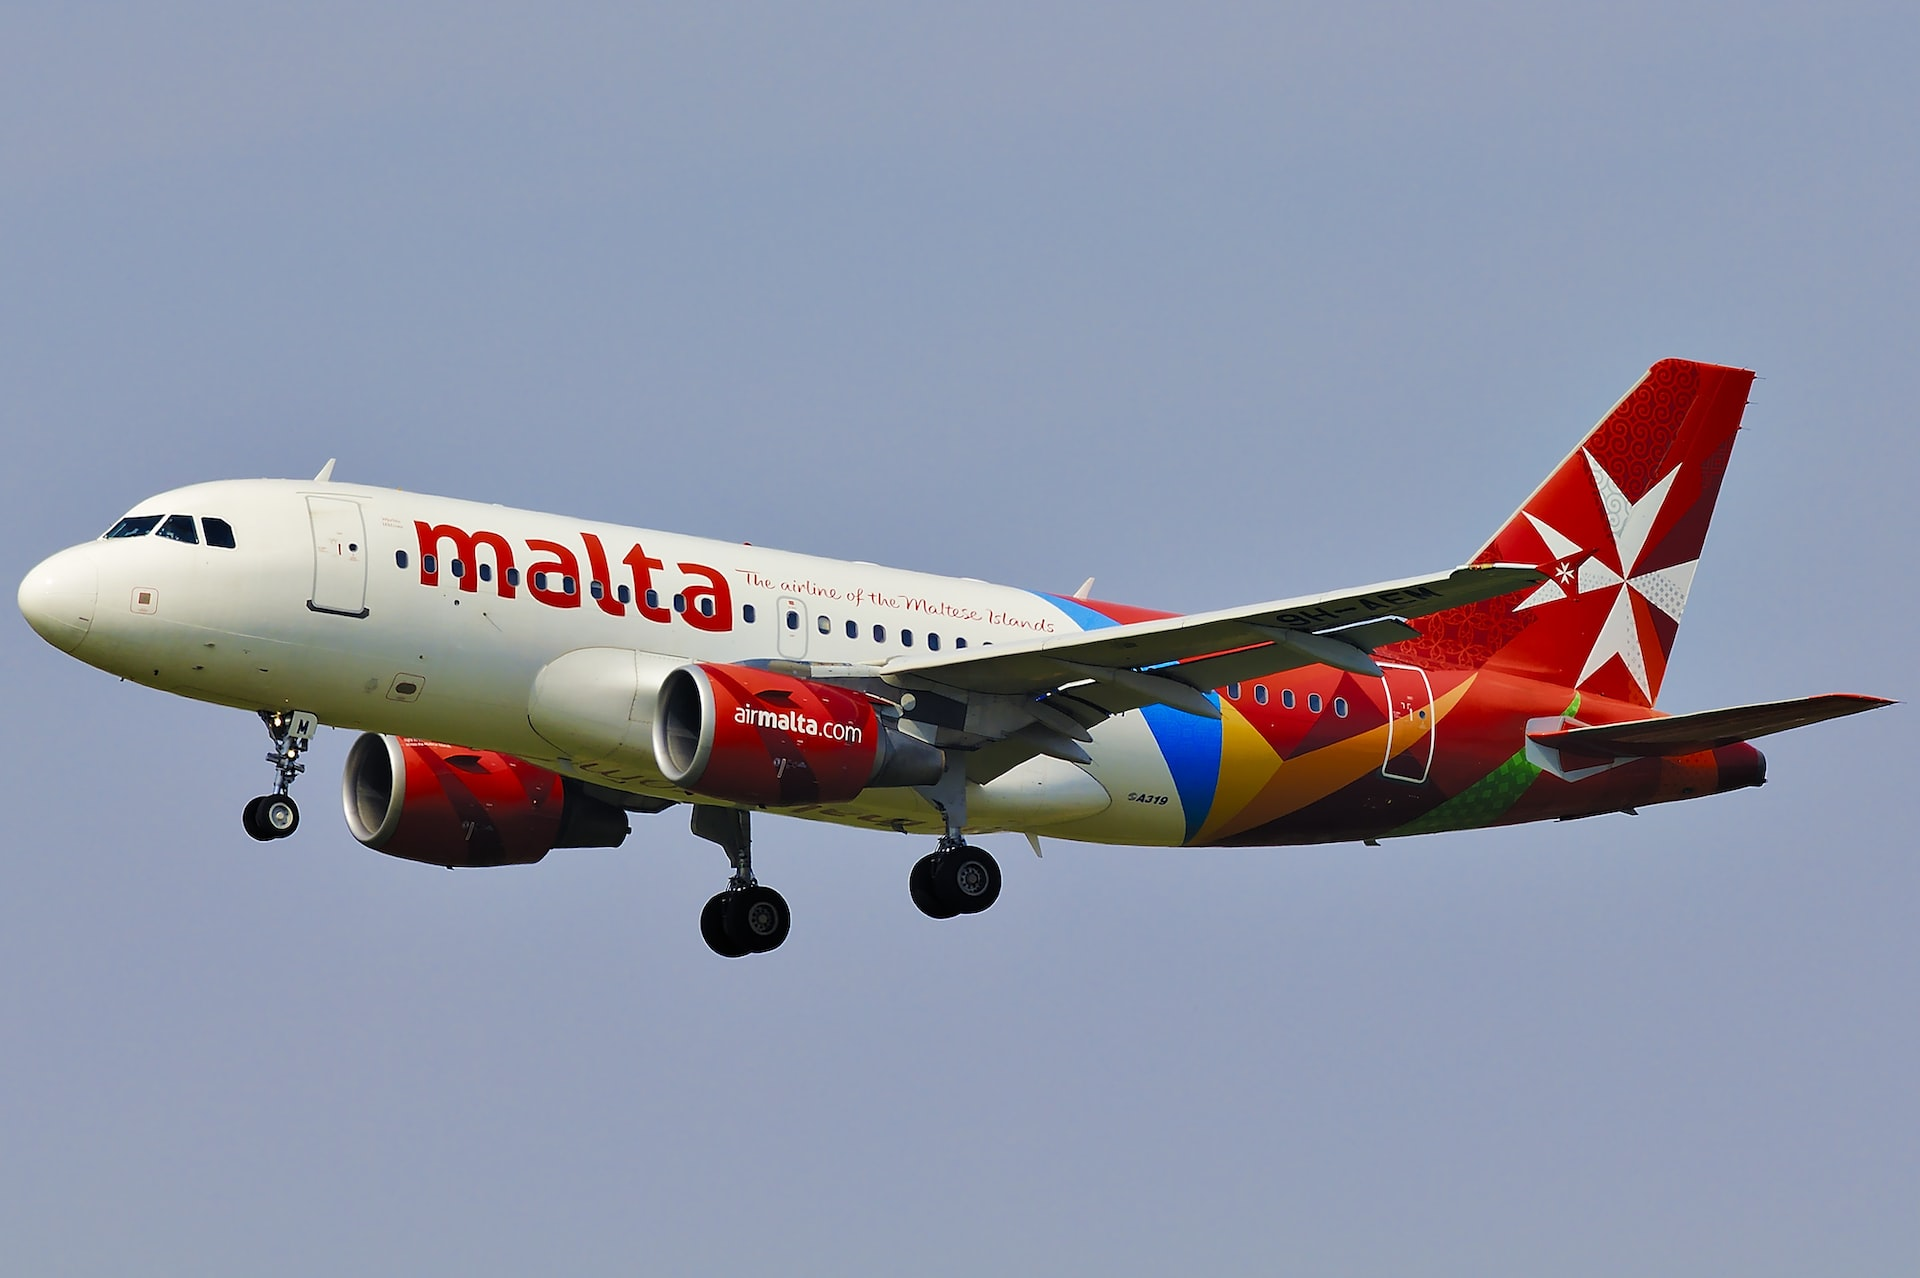 Malta Airlines aircraft landing on a clear day.